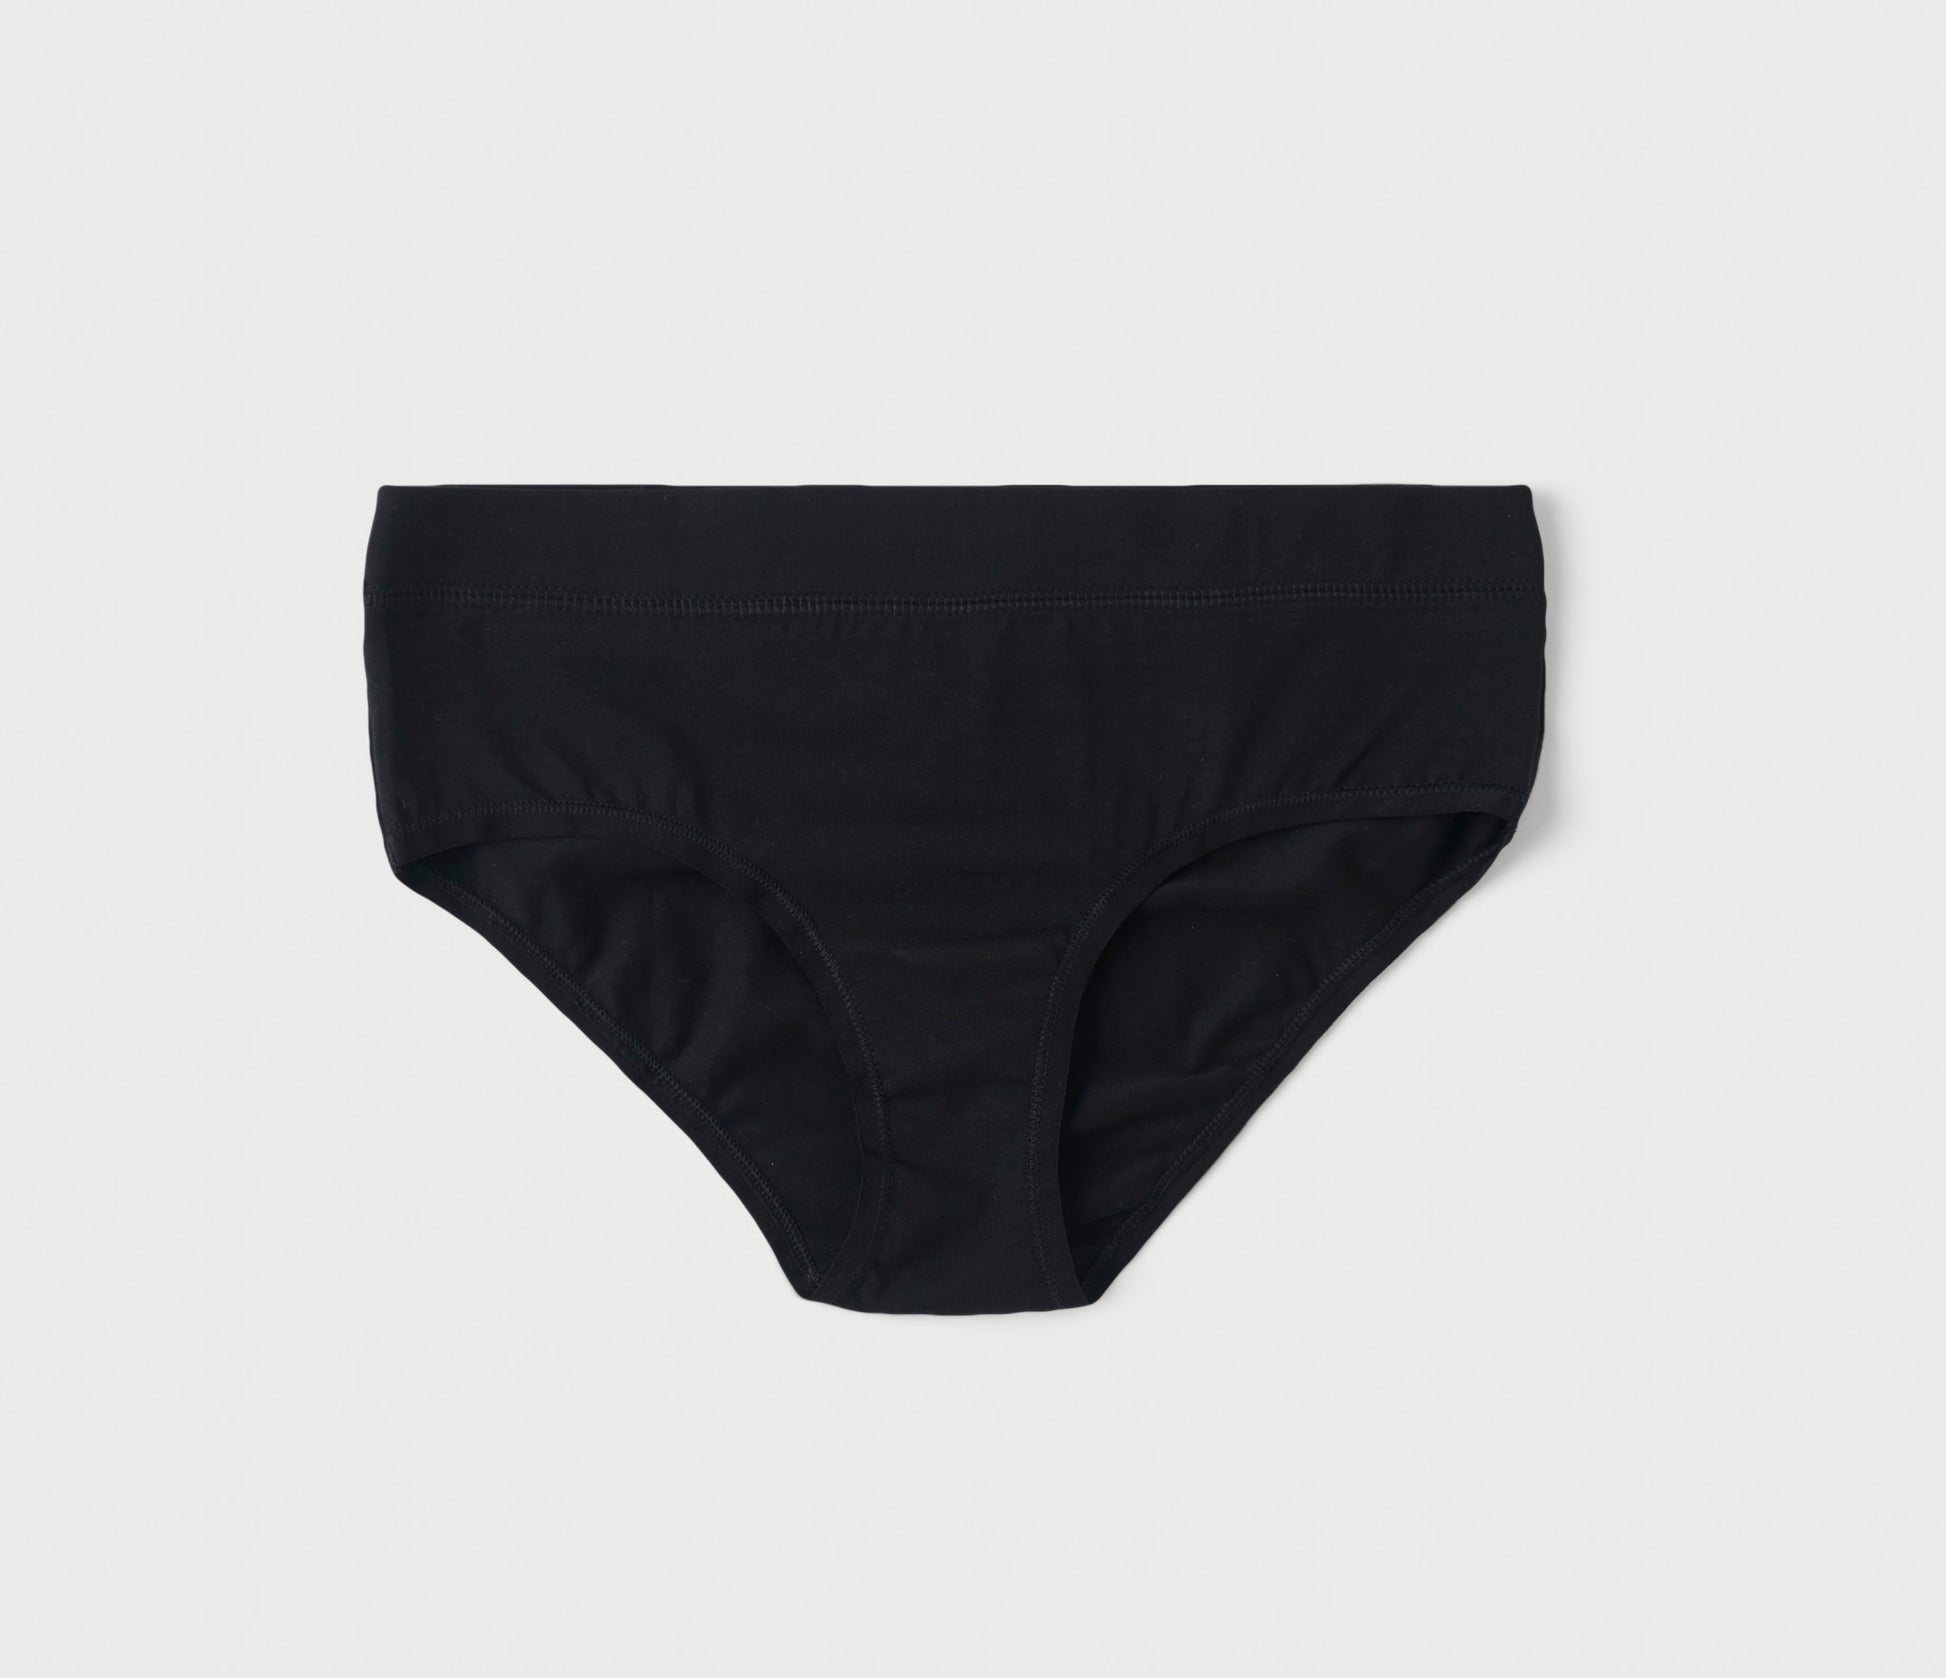 Buy Core Briefs 2-pack, Fast Delivery